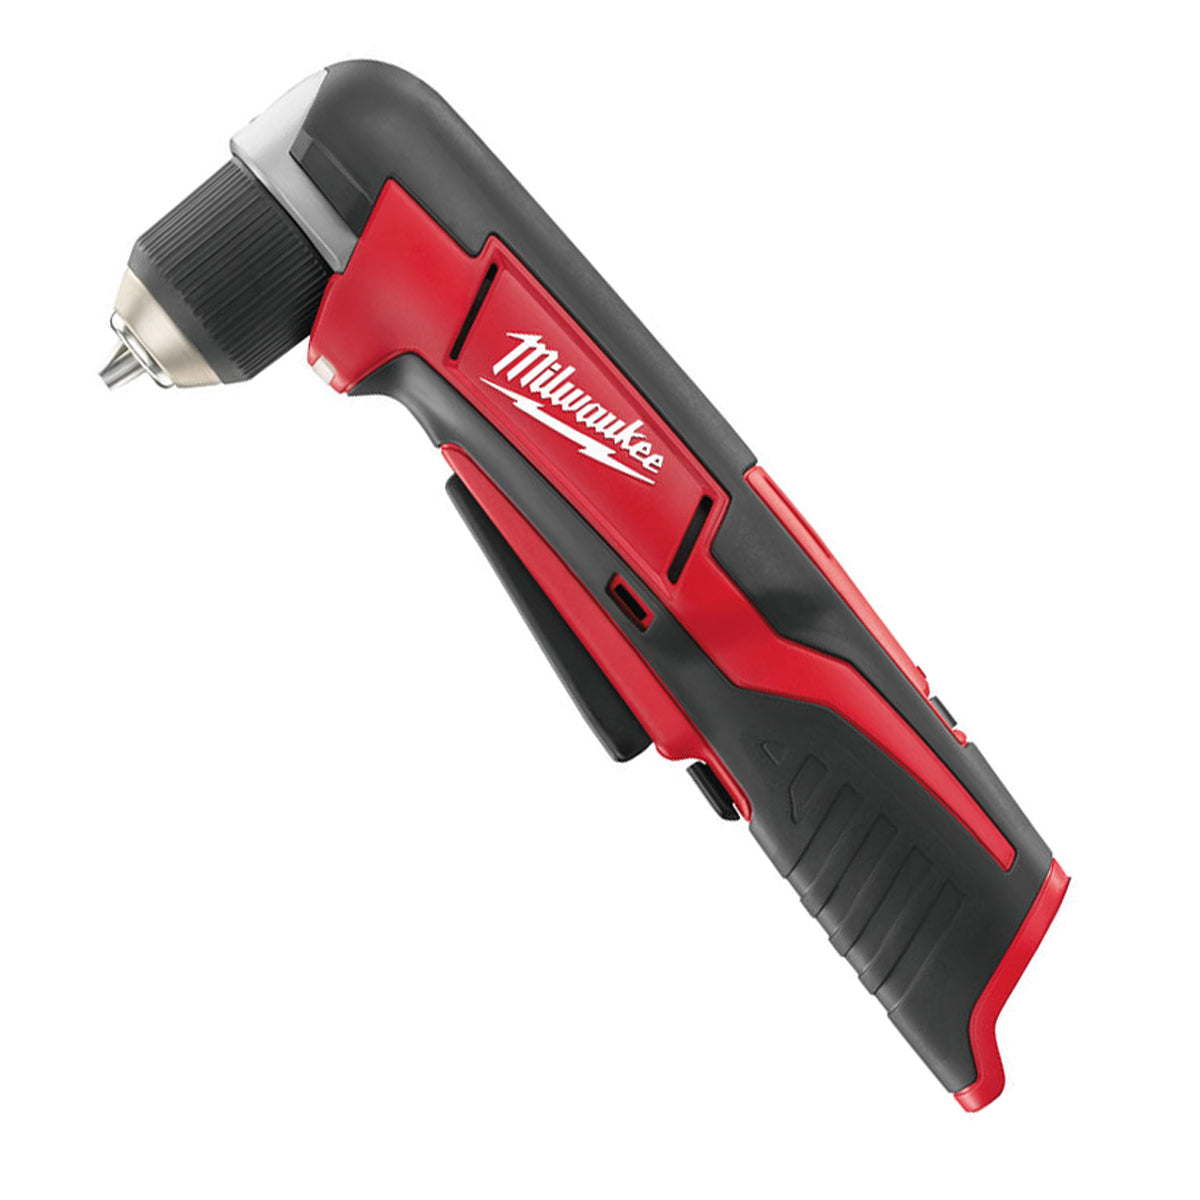 Milwaukee C12RAD-0 12V Angle Drill with 1 x 2.0Ah Battery & Charger